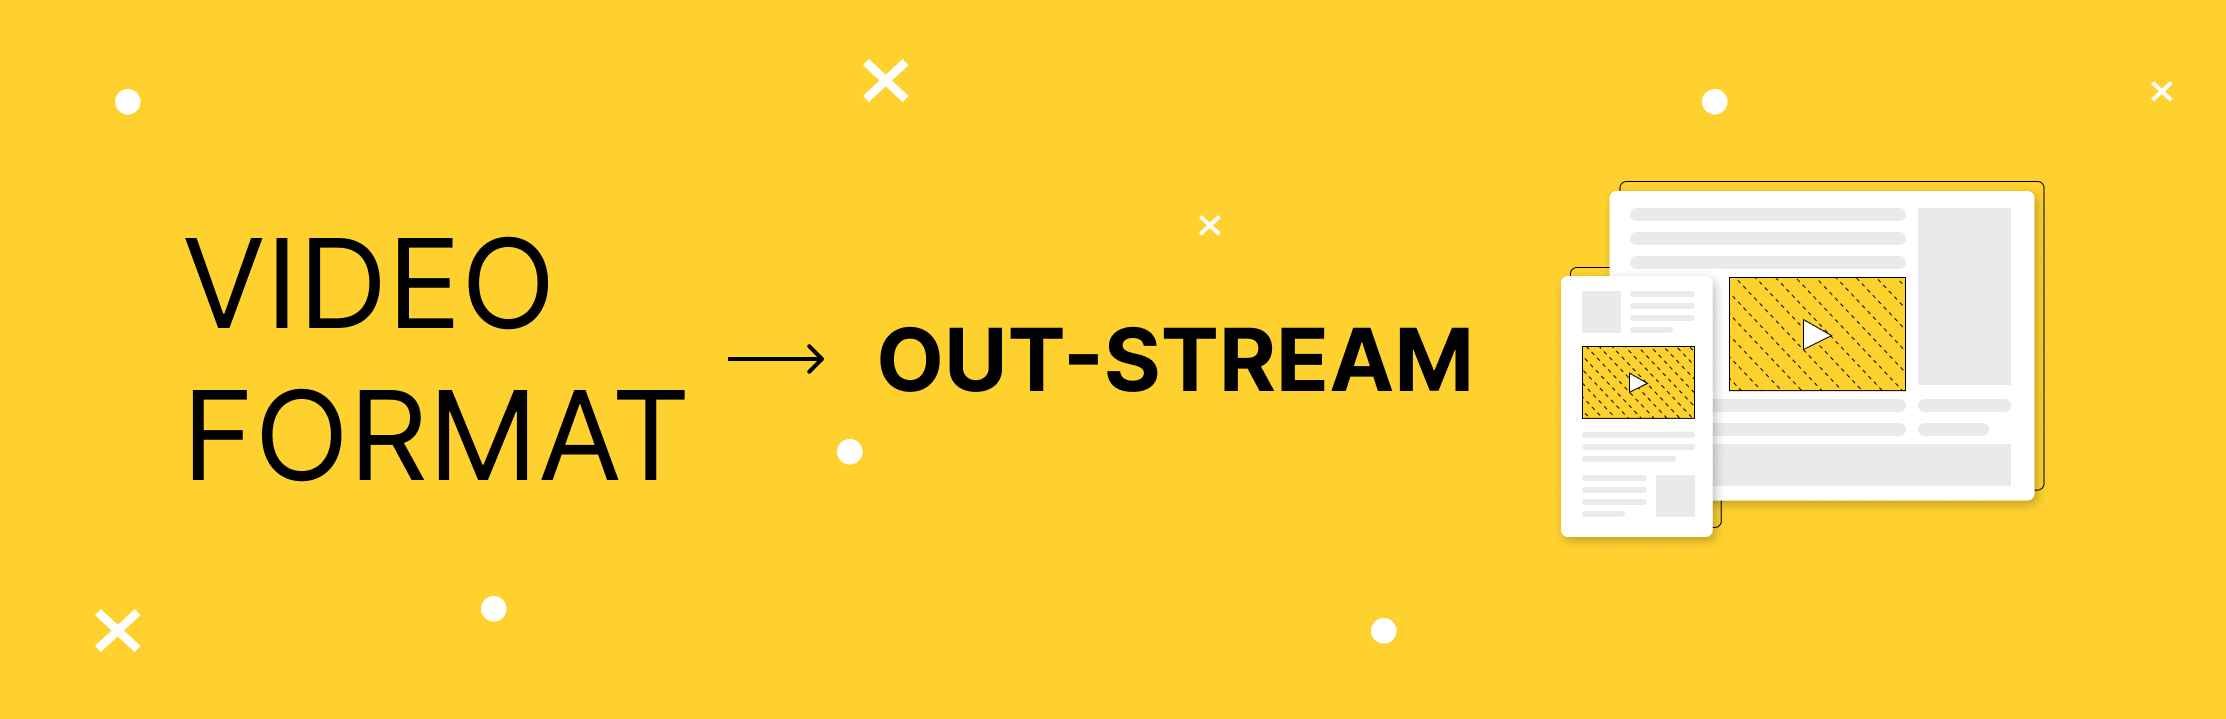 ONCLICKA_OUT-STREAM.png